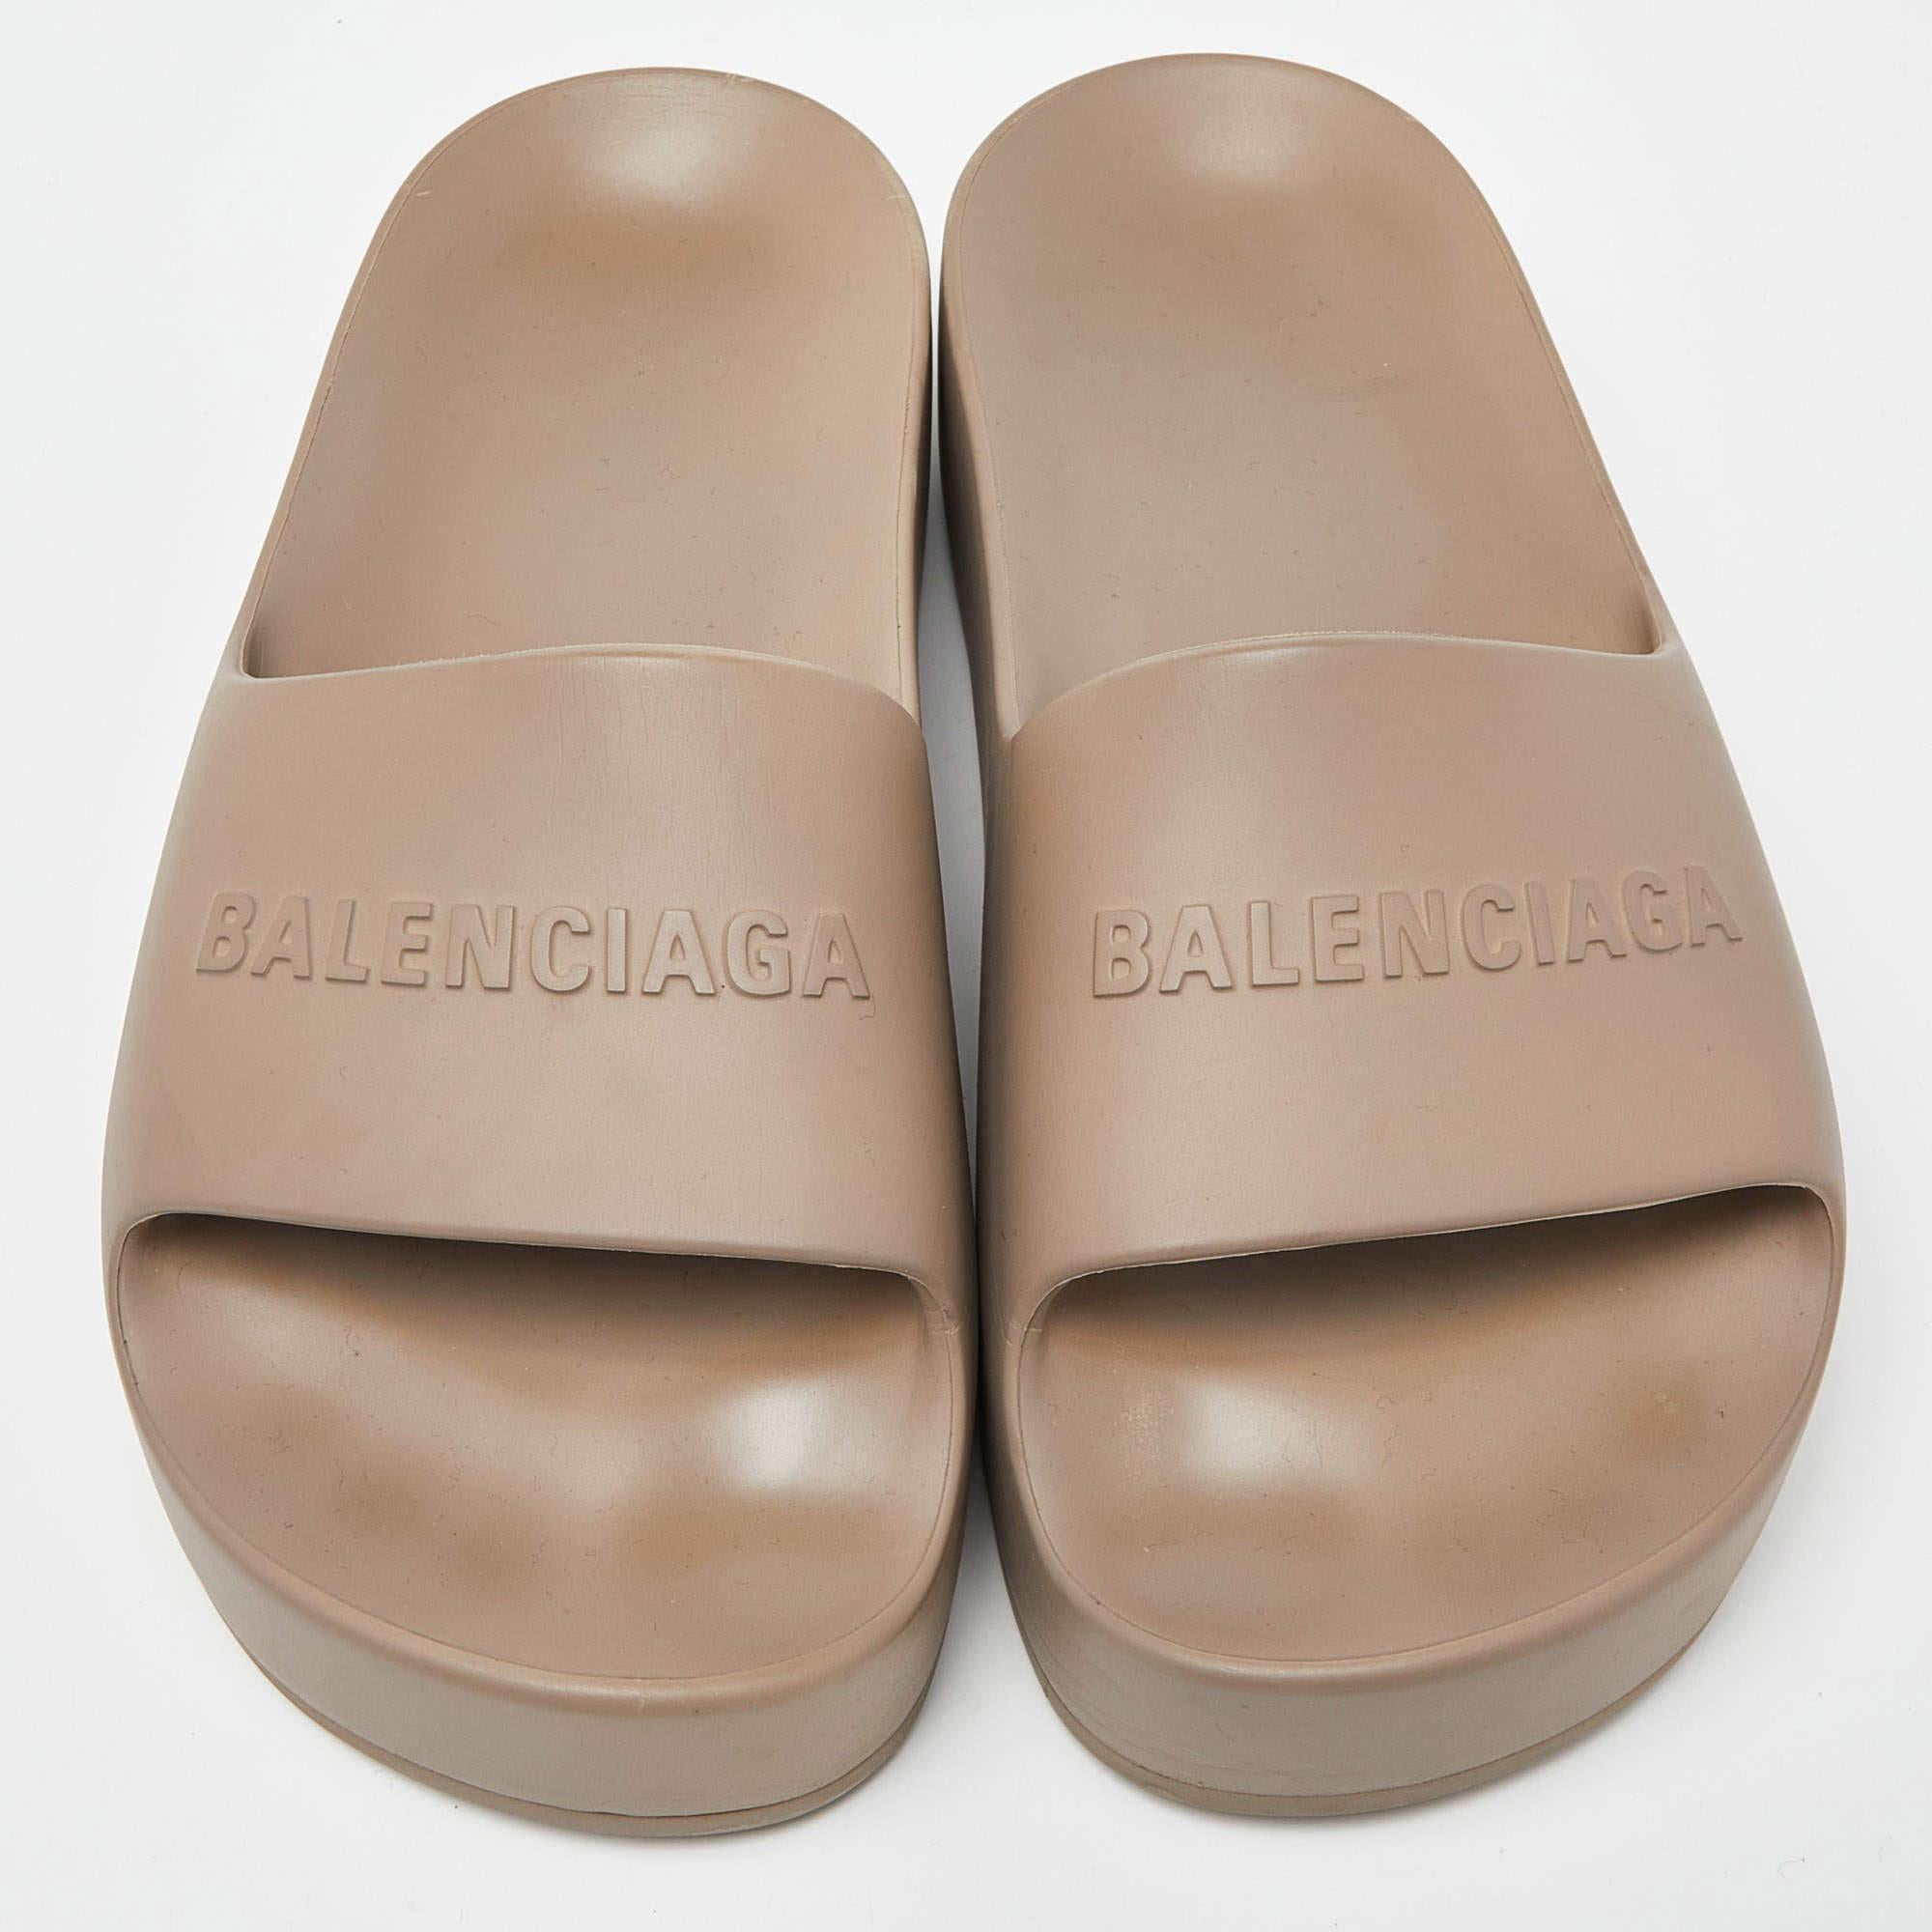 The fashion house’s tradition of excellence, coupled with modern design sensibilities, works to make these platform slides a fabulous choice. They'll help you deliver a chic look with ease.

